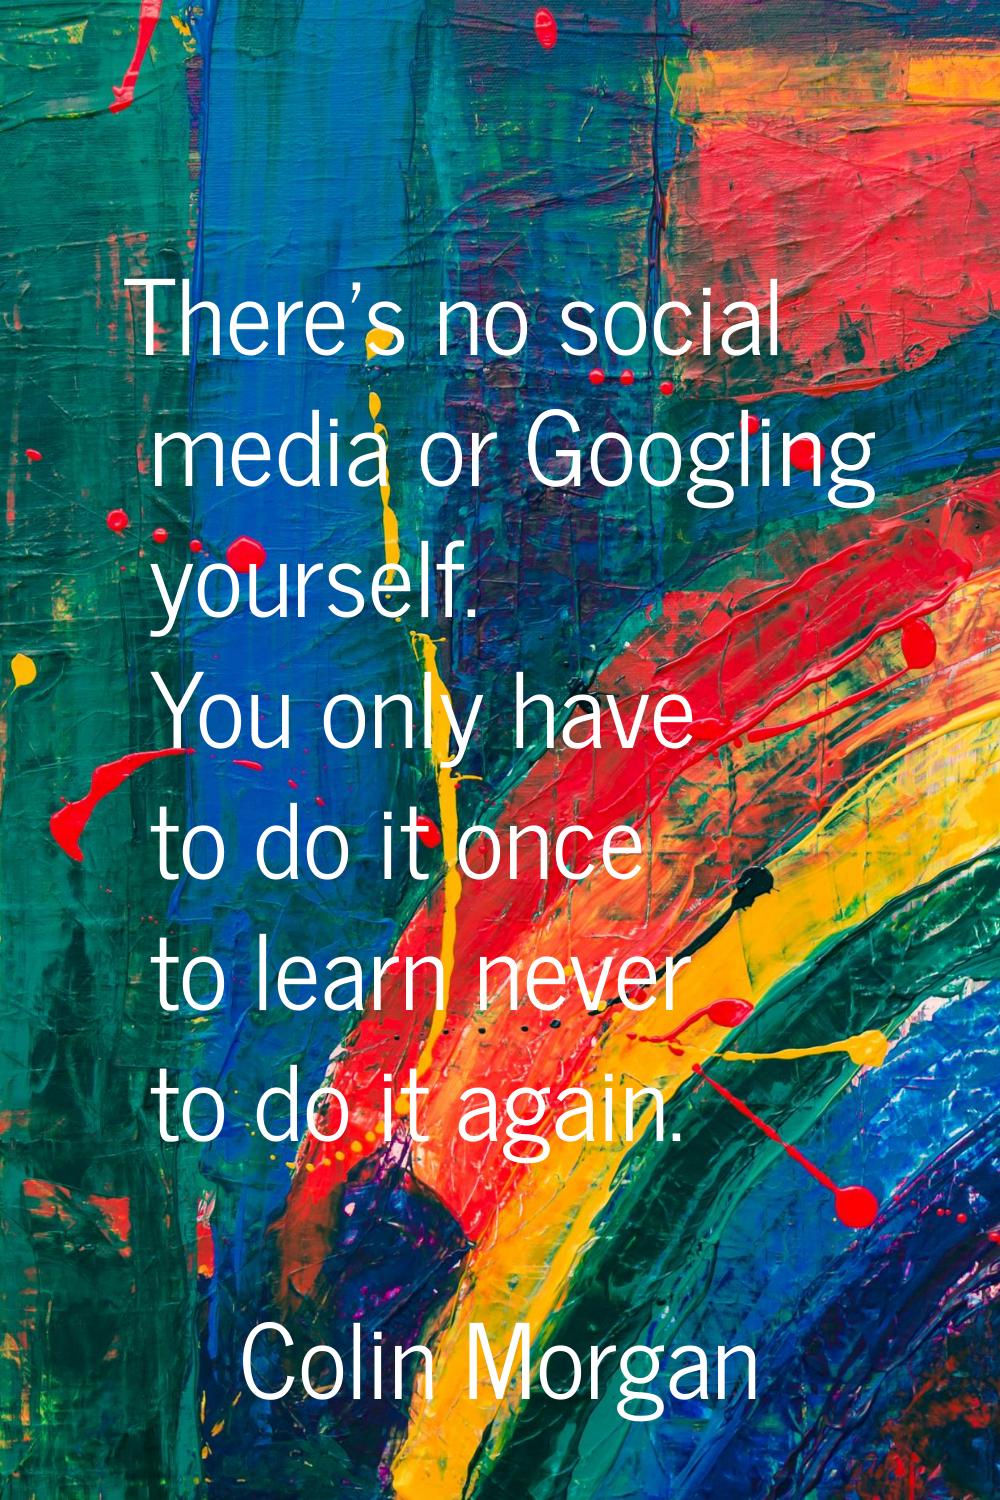 There's no social media or Googling yourself. You only have to do it once to learn never to do it a